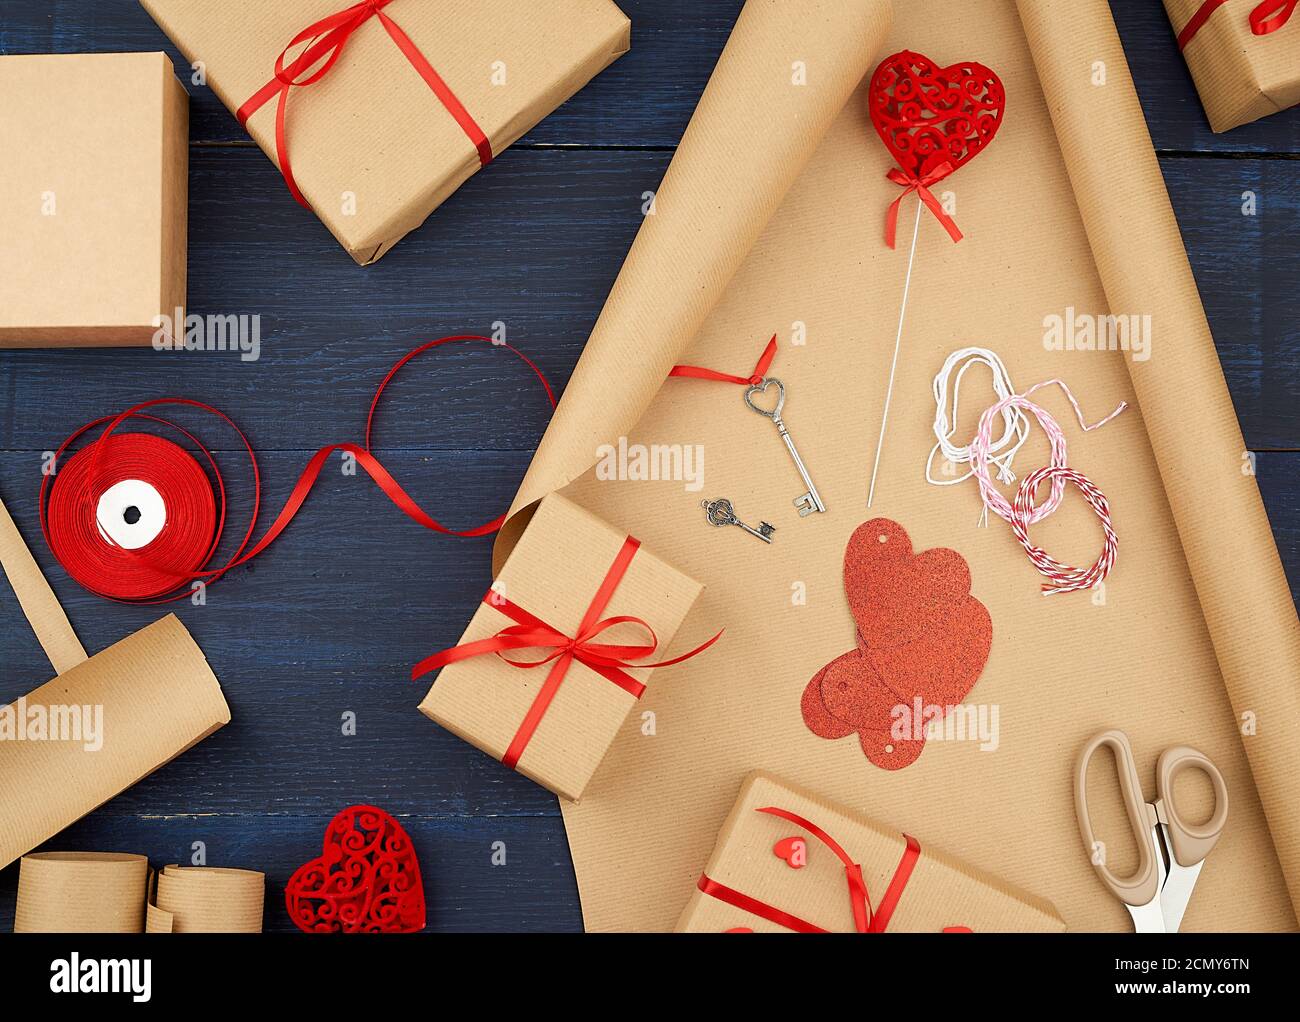 brown kraft paper, packed gift bags and tied with a red ribbon, red heart, set of items for making g Stock Photo